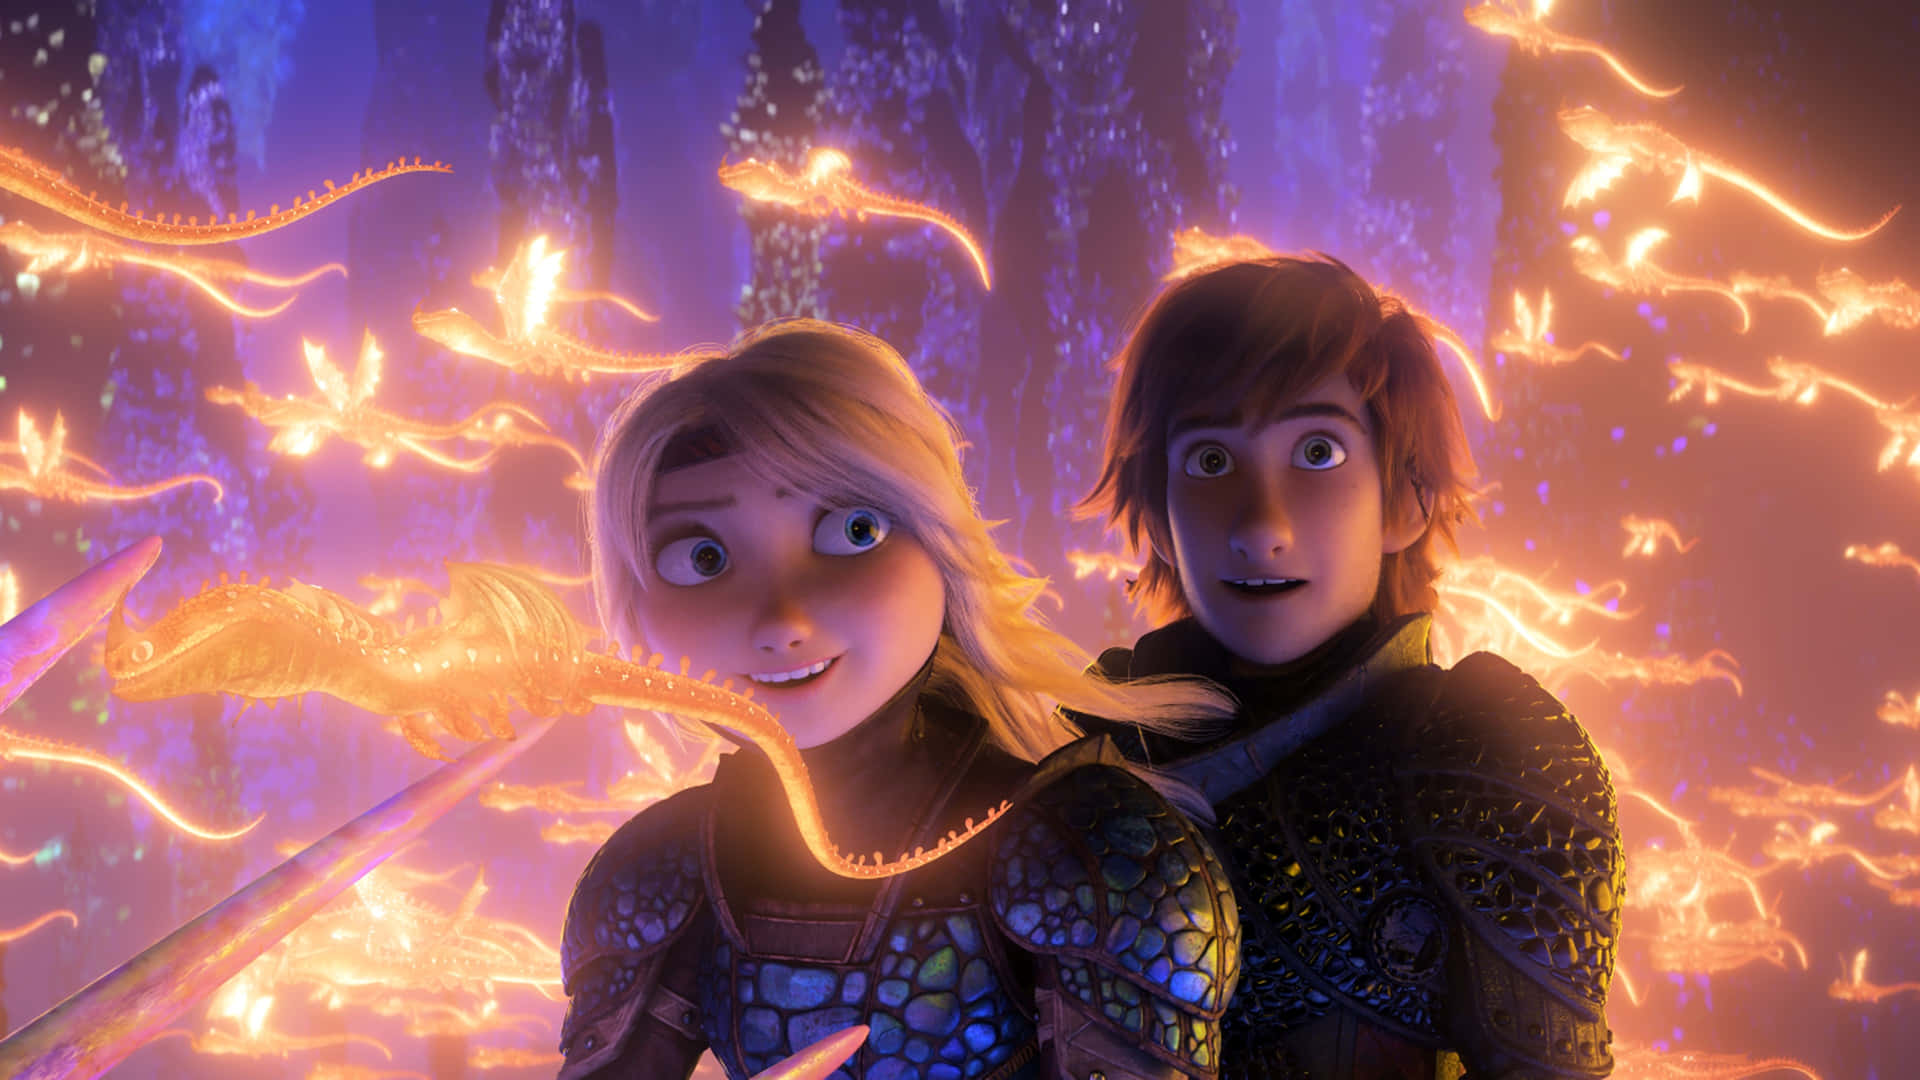 Hiccup and Toothless fly into an incredible world in How to Train Your Dragon: The Hidden World Wallpaper